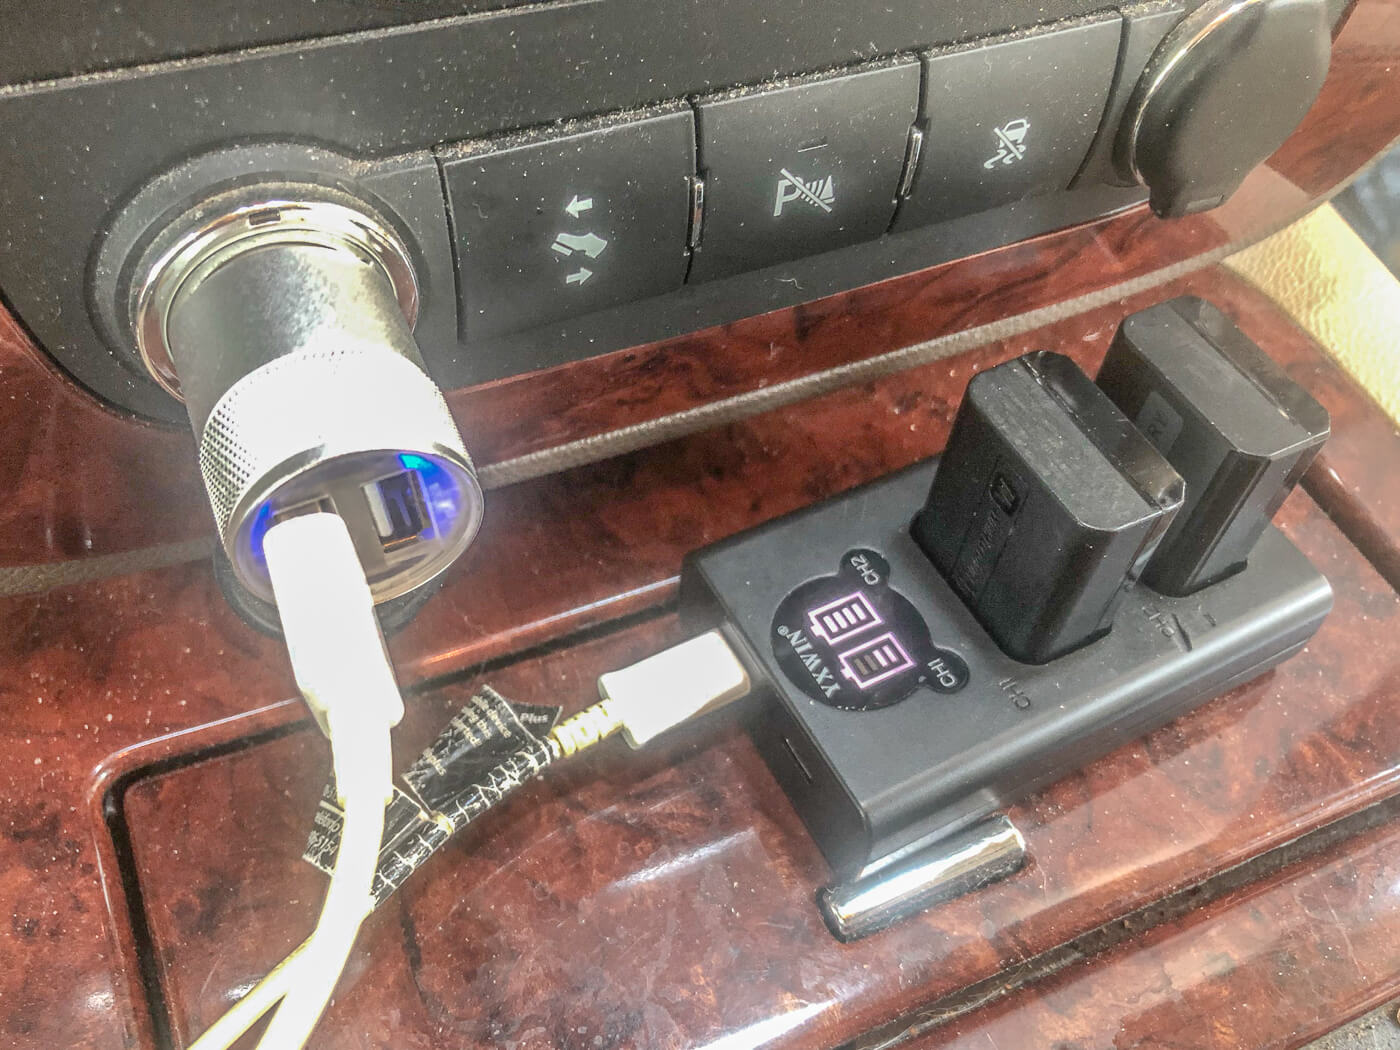 NP-FW50 battery charger in car